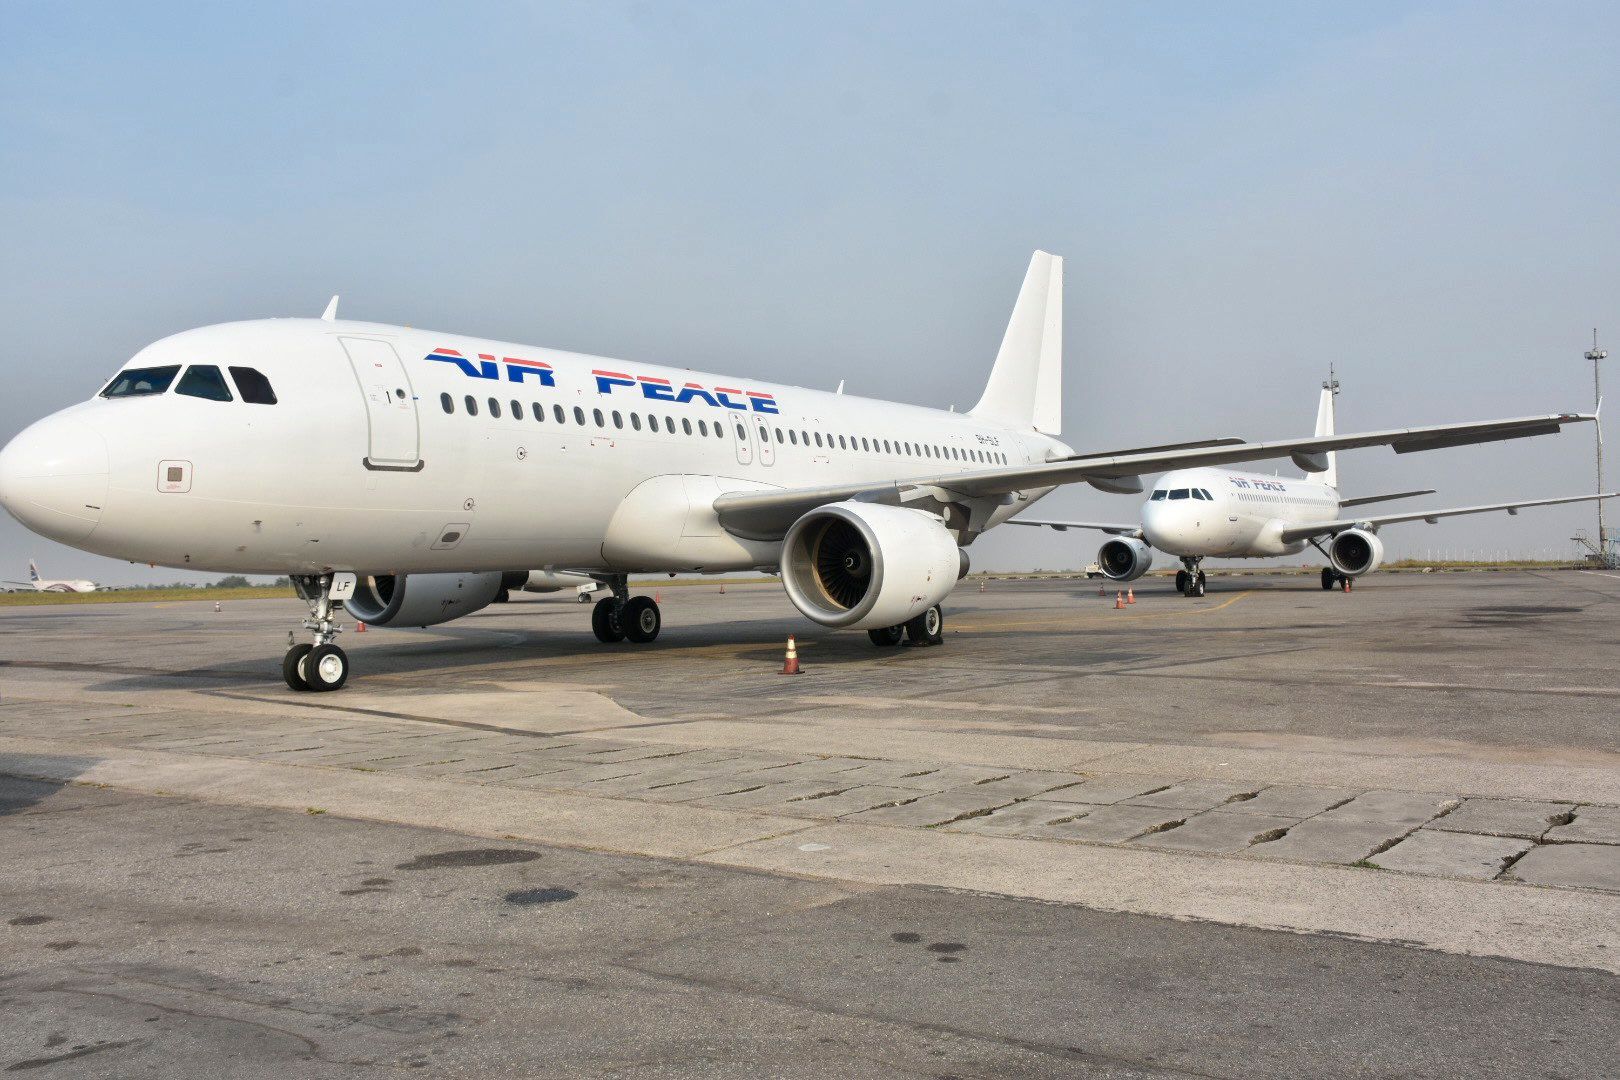 Air Peace Analyzed: Inside West Africa’s Largest Airline